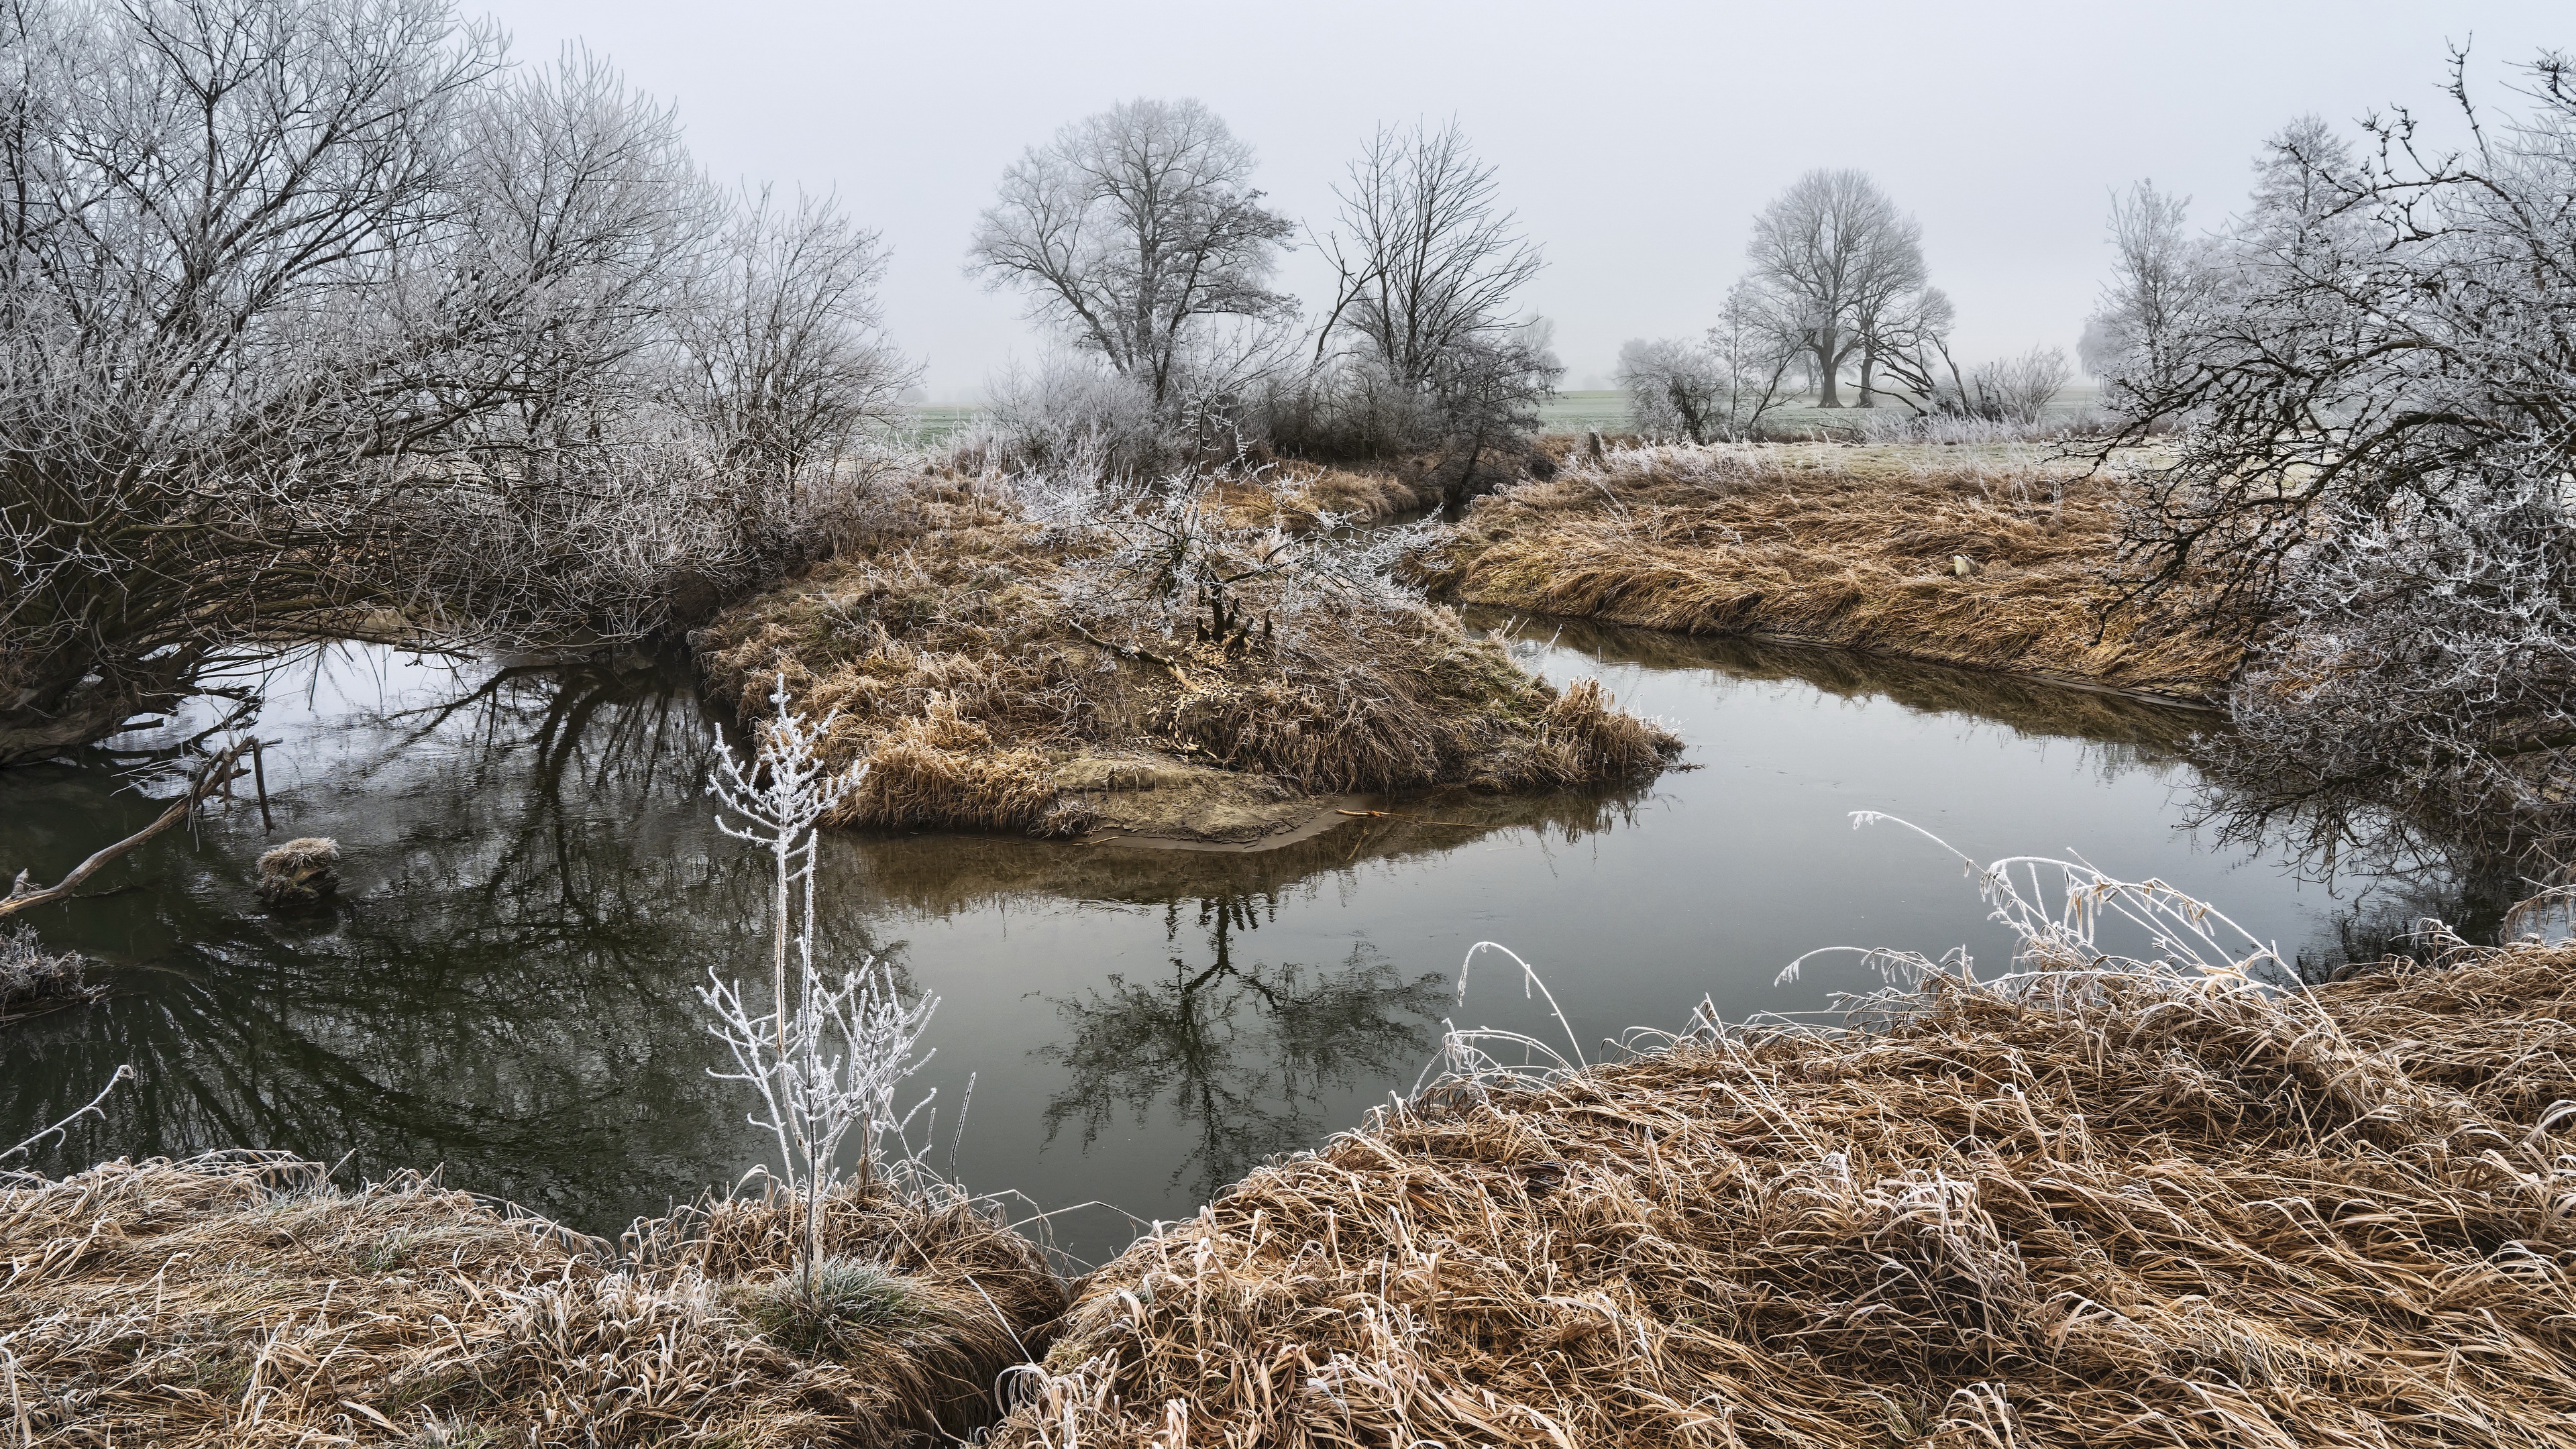 General 3840x2160 outdoors nature water landscape creeks winter cold frost